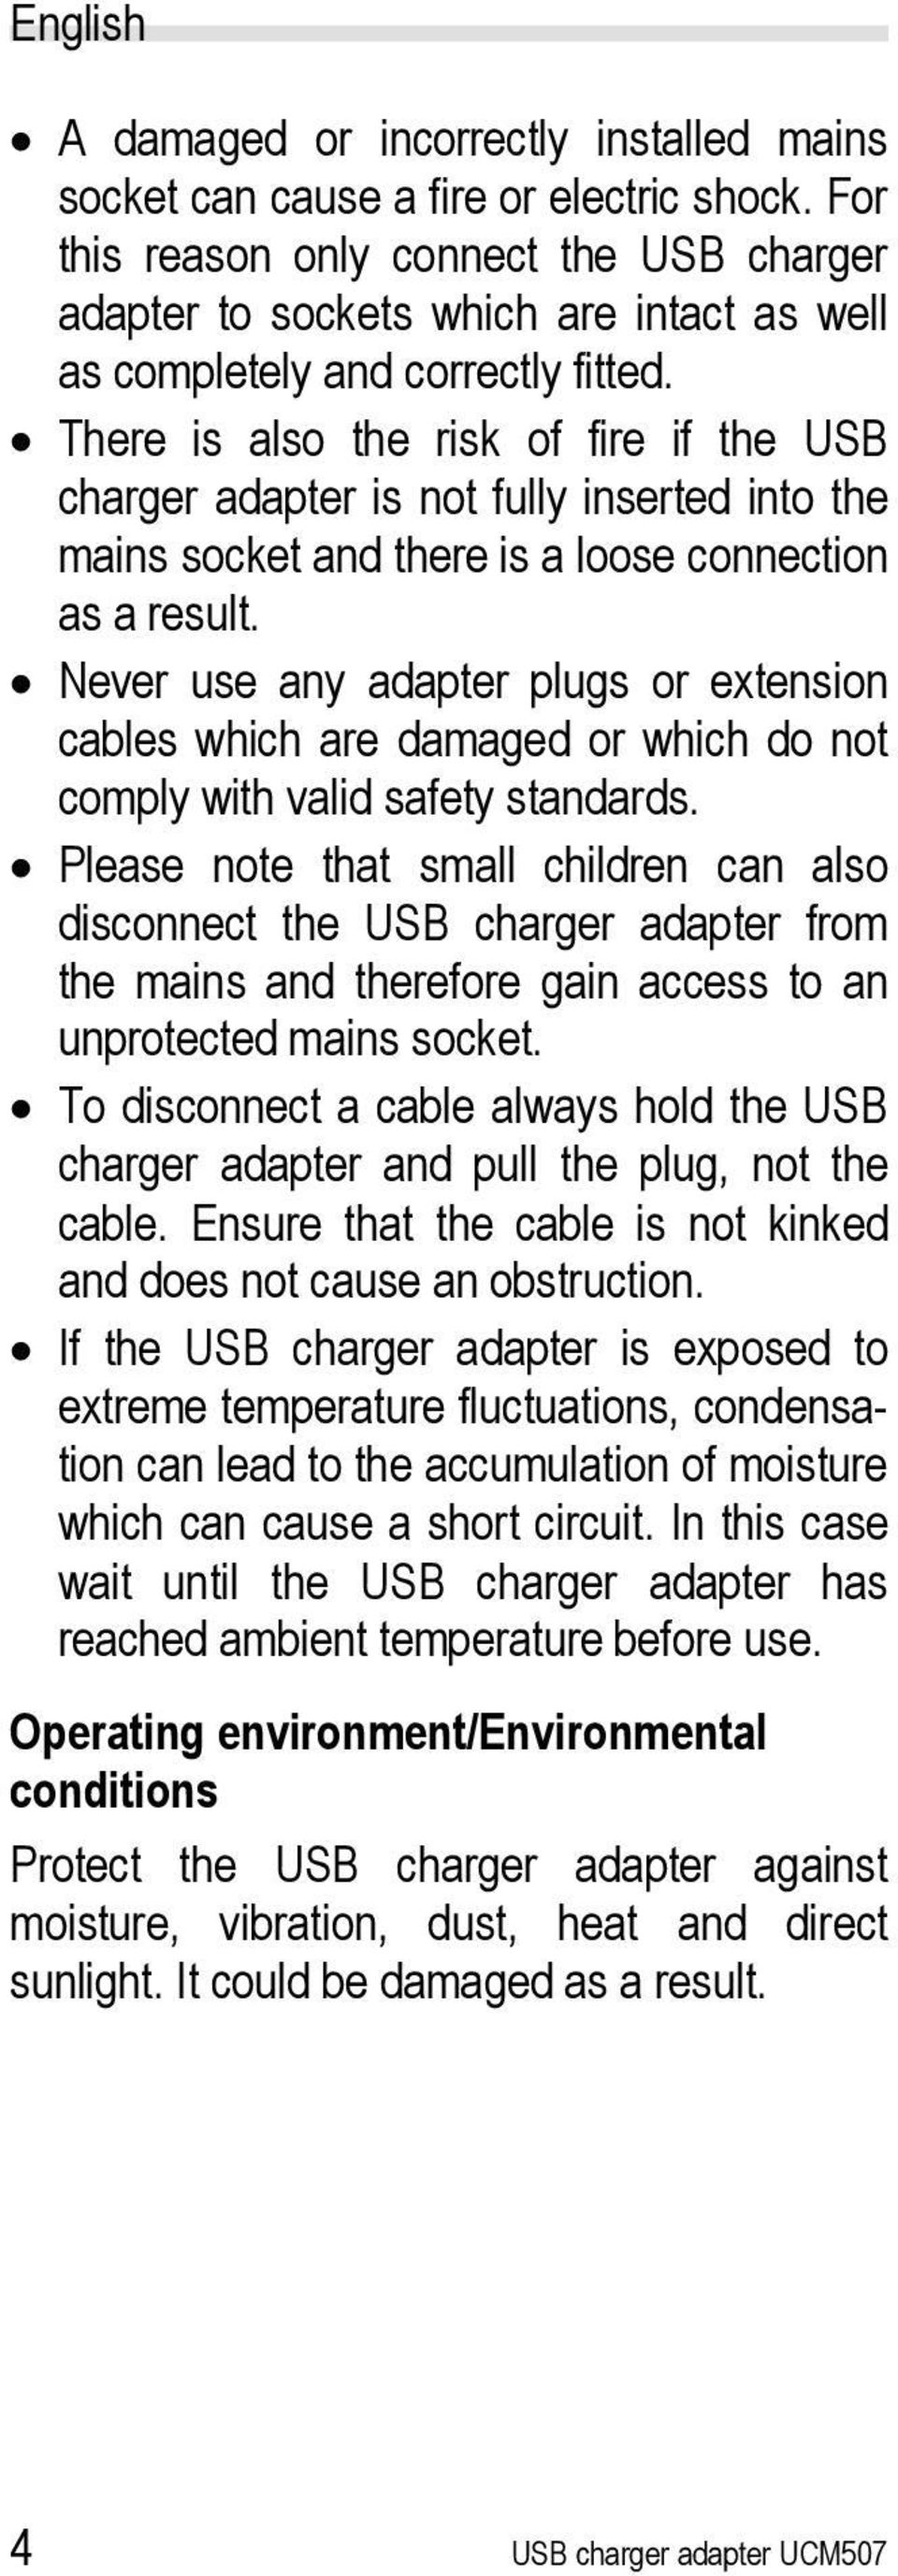 There is also the risk of fire if the USB charger adapter is not fully inserted into the mains socket and there is a loose connection as a result.